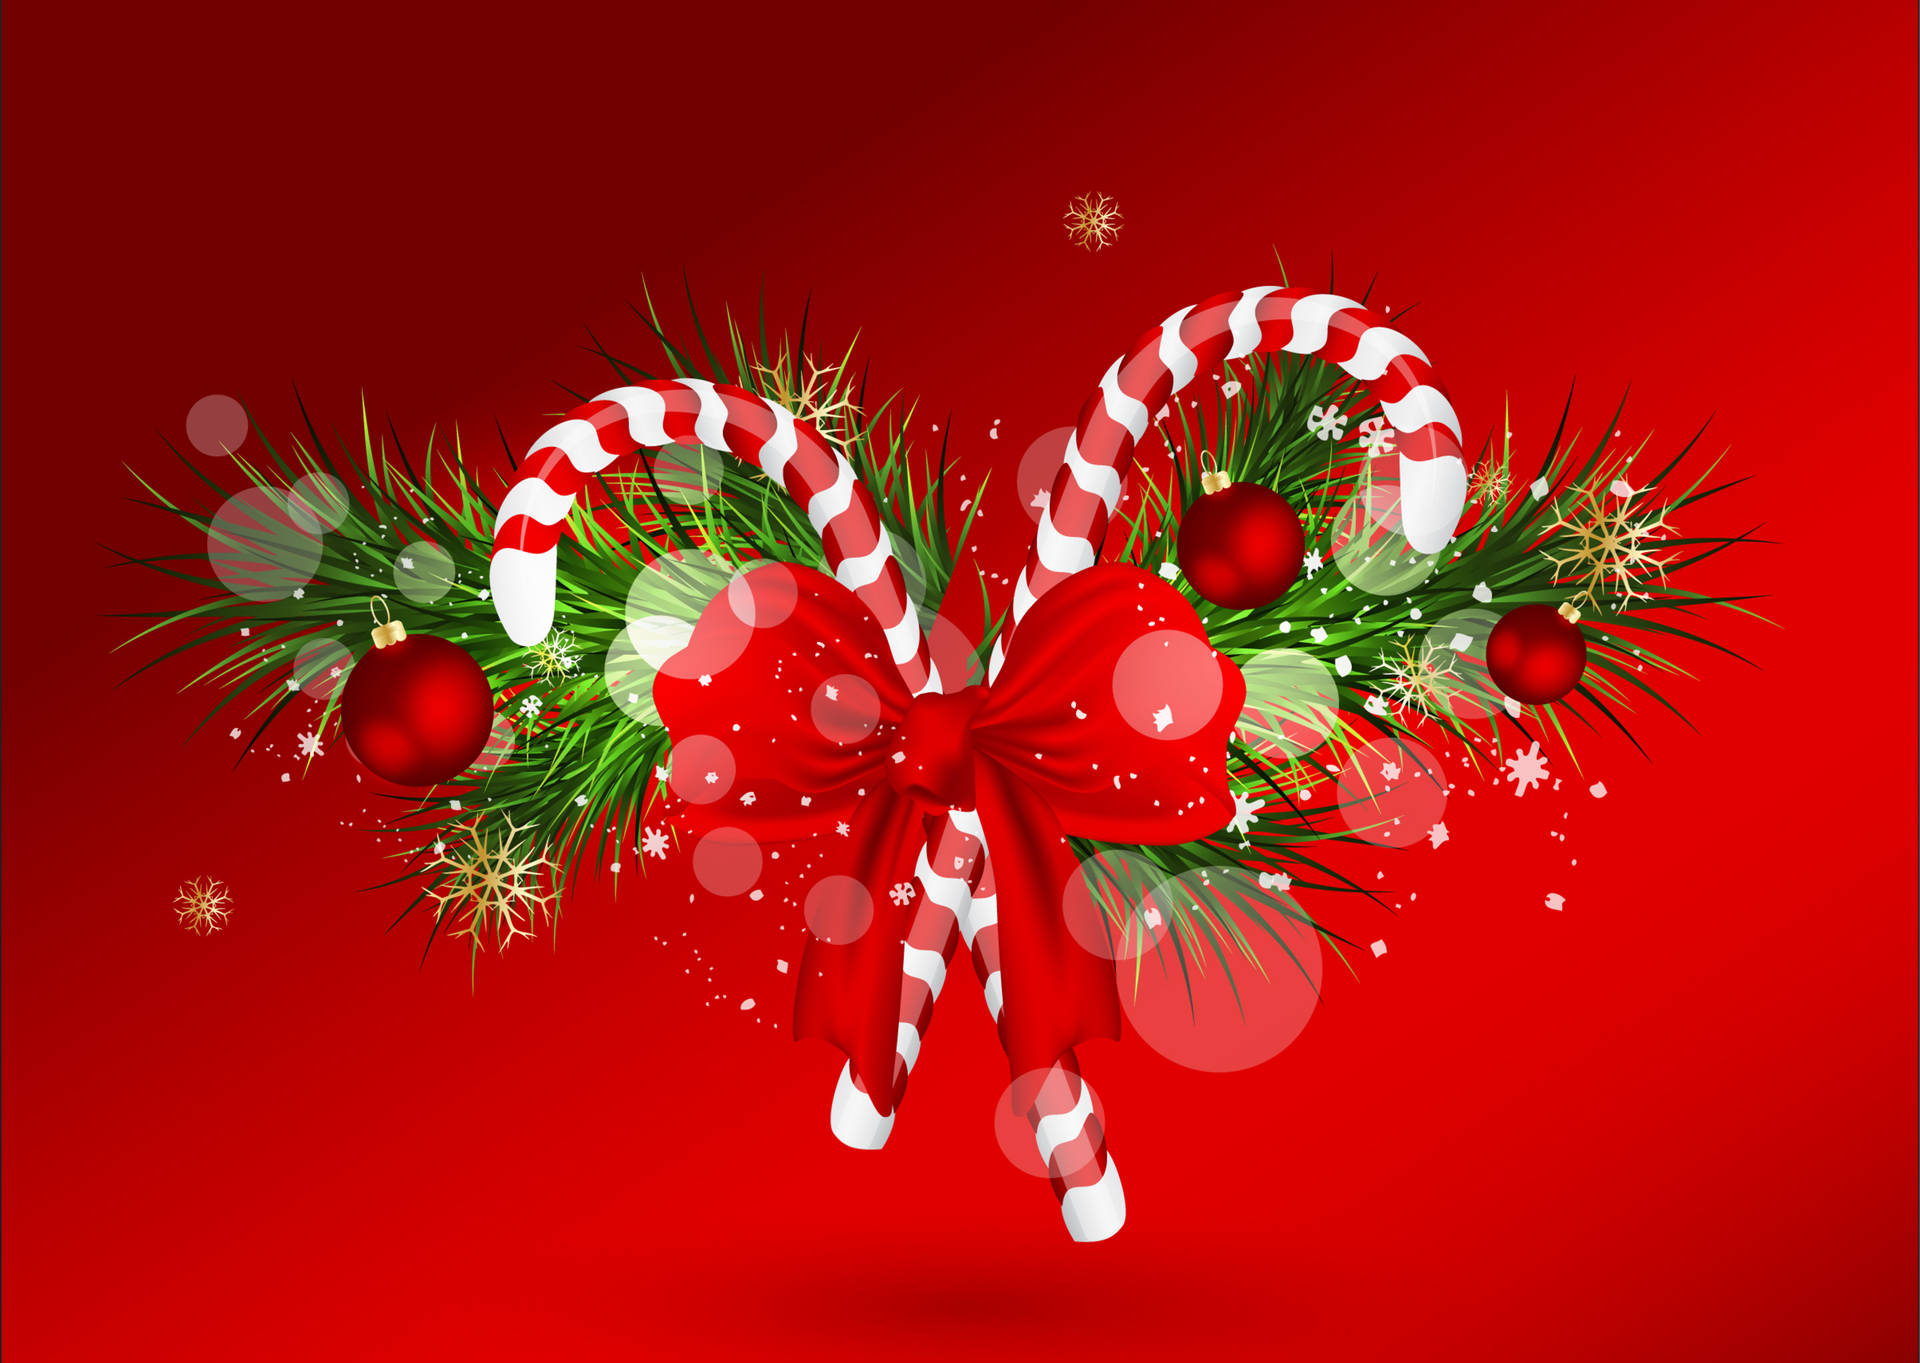 Candy Cane Christmas Wreath Wallpaper